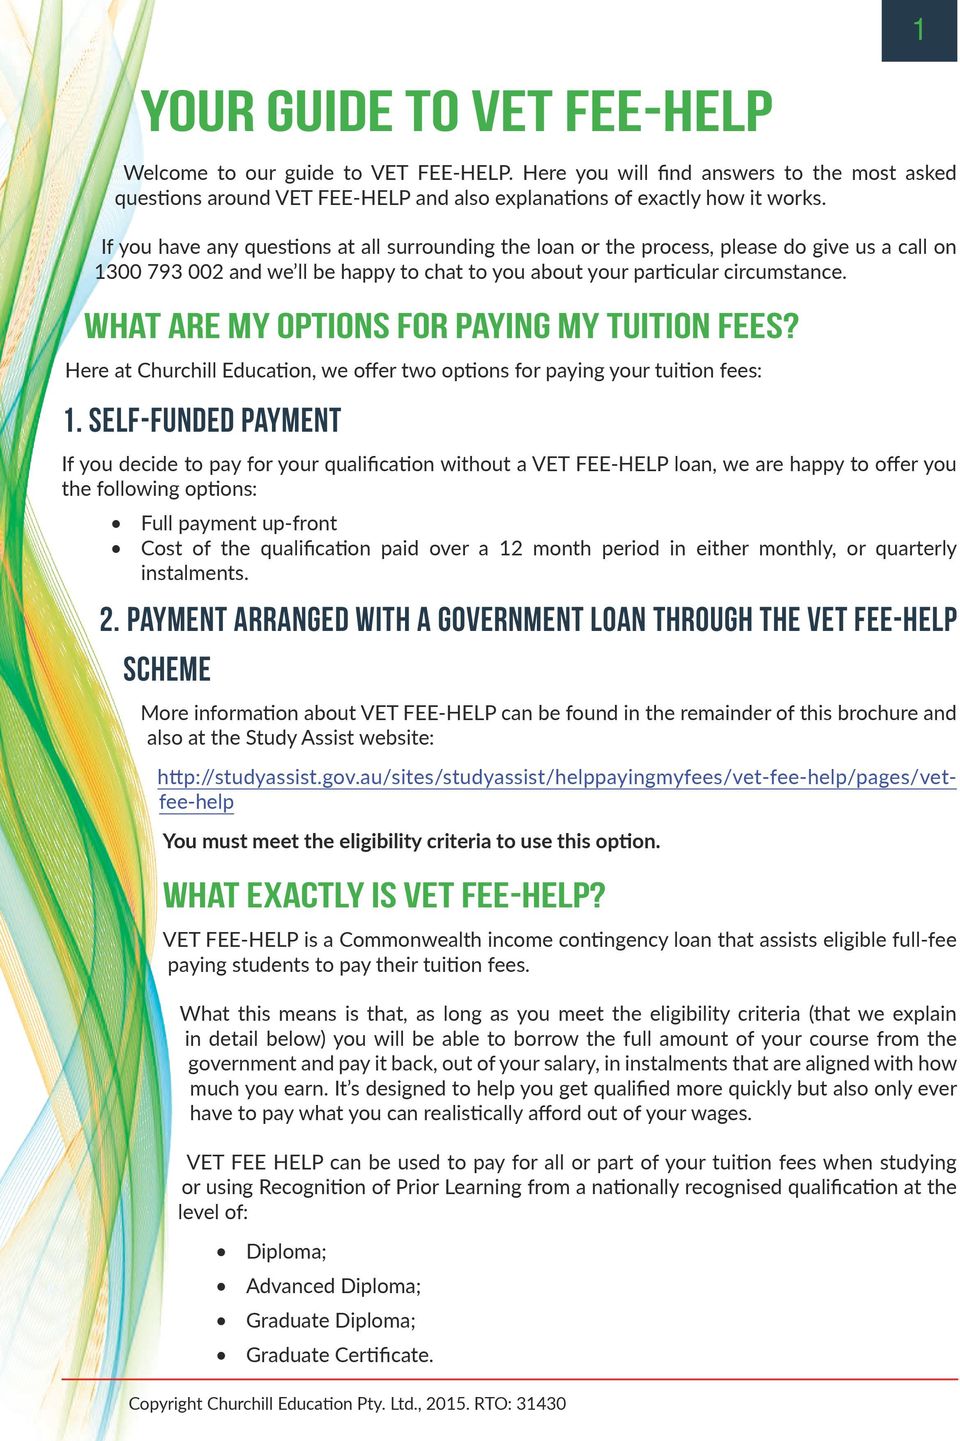 What are my options for paying my tuition fees? Here at Churchill Education, we offer two options for paying your tuition fees: 1.